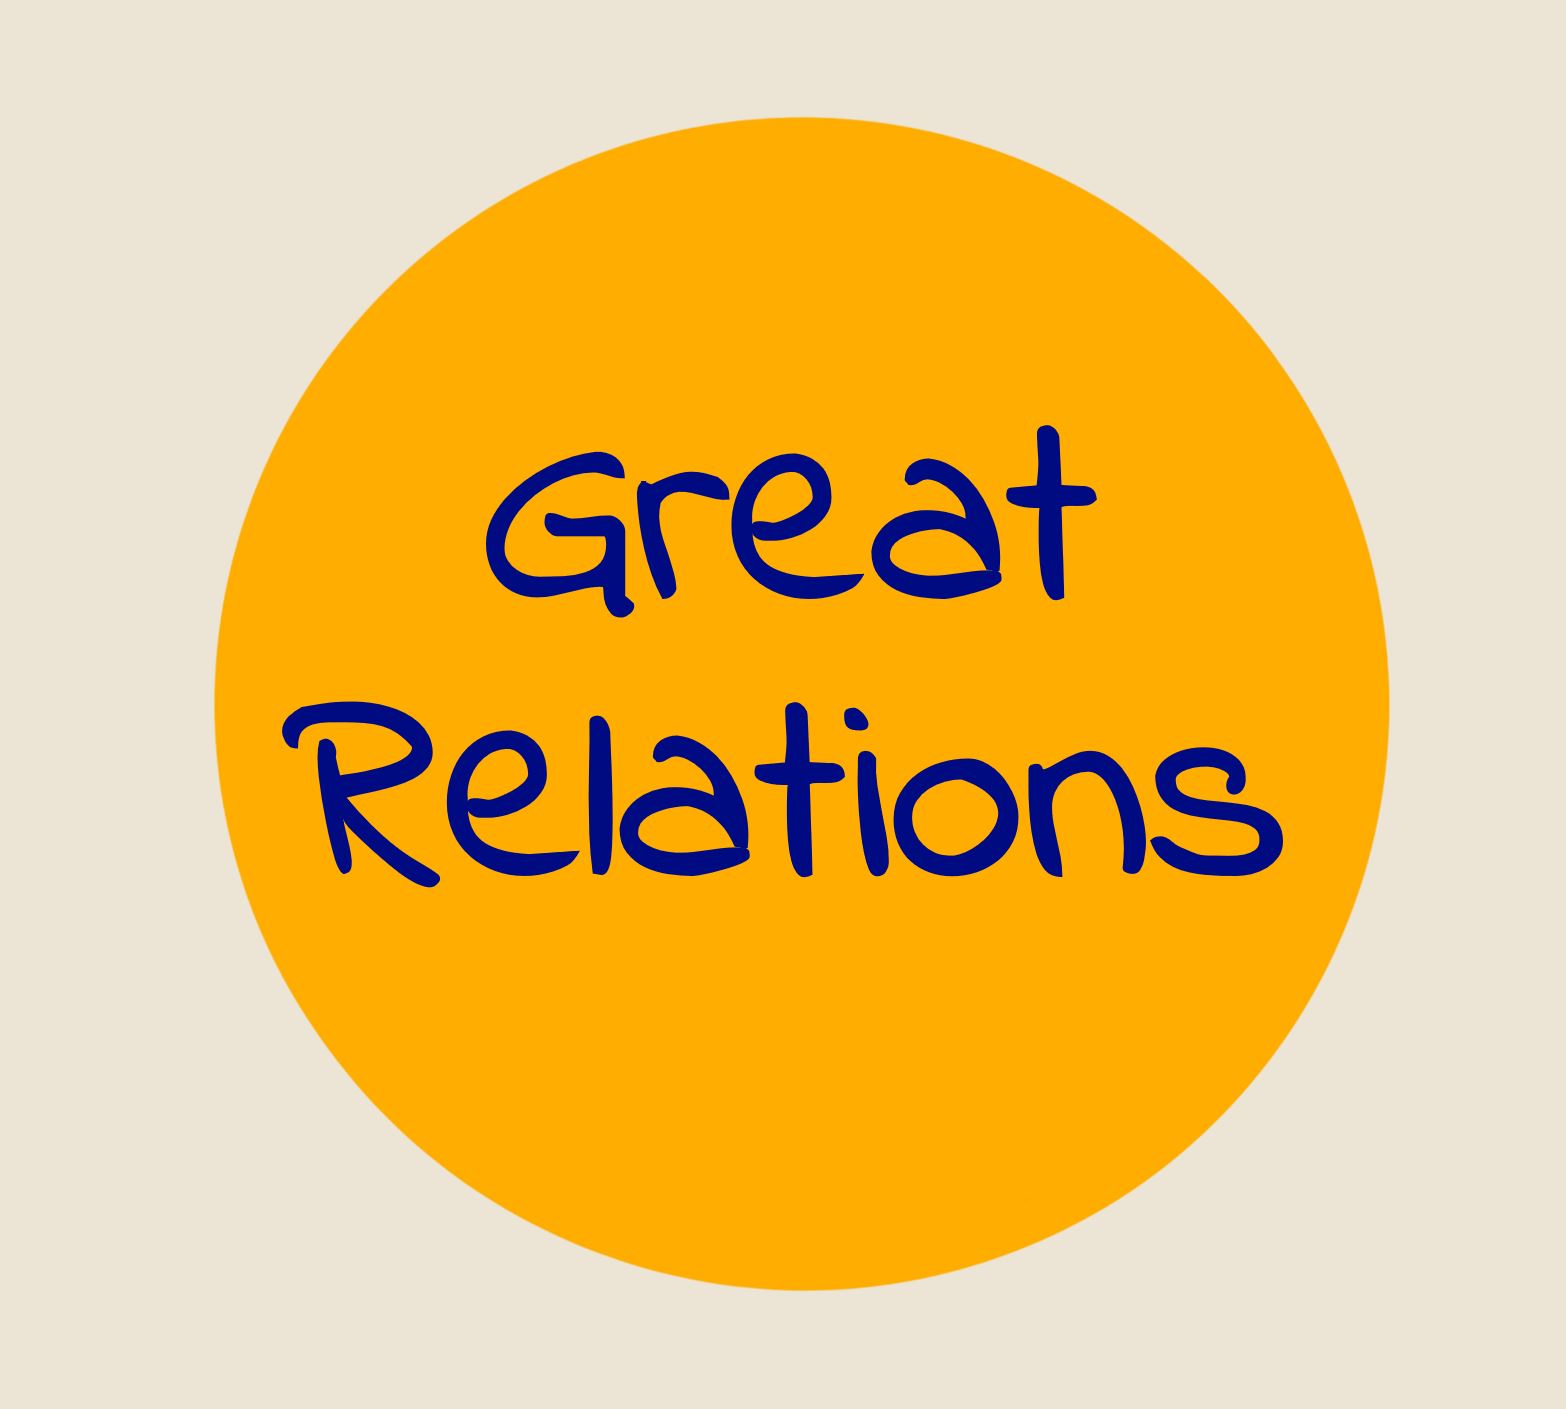 Great Relations